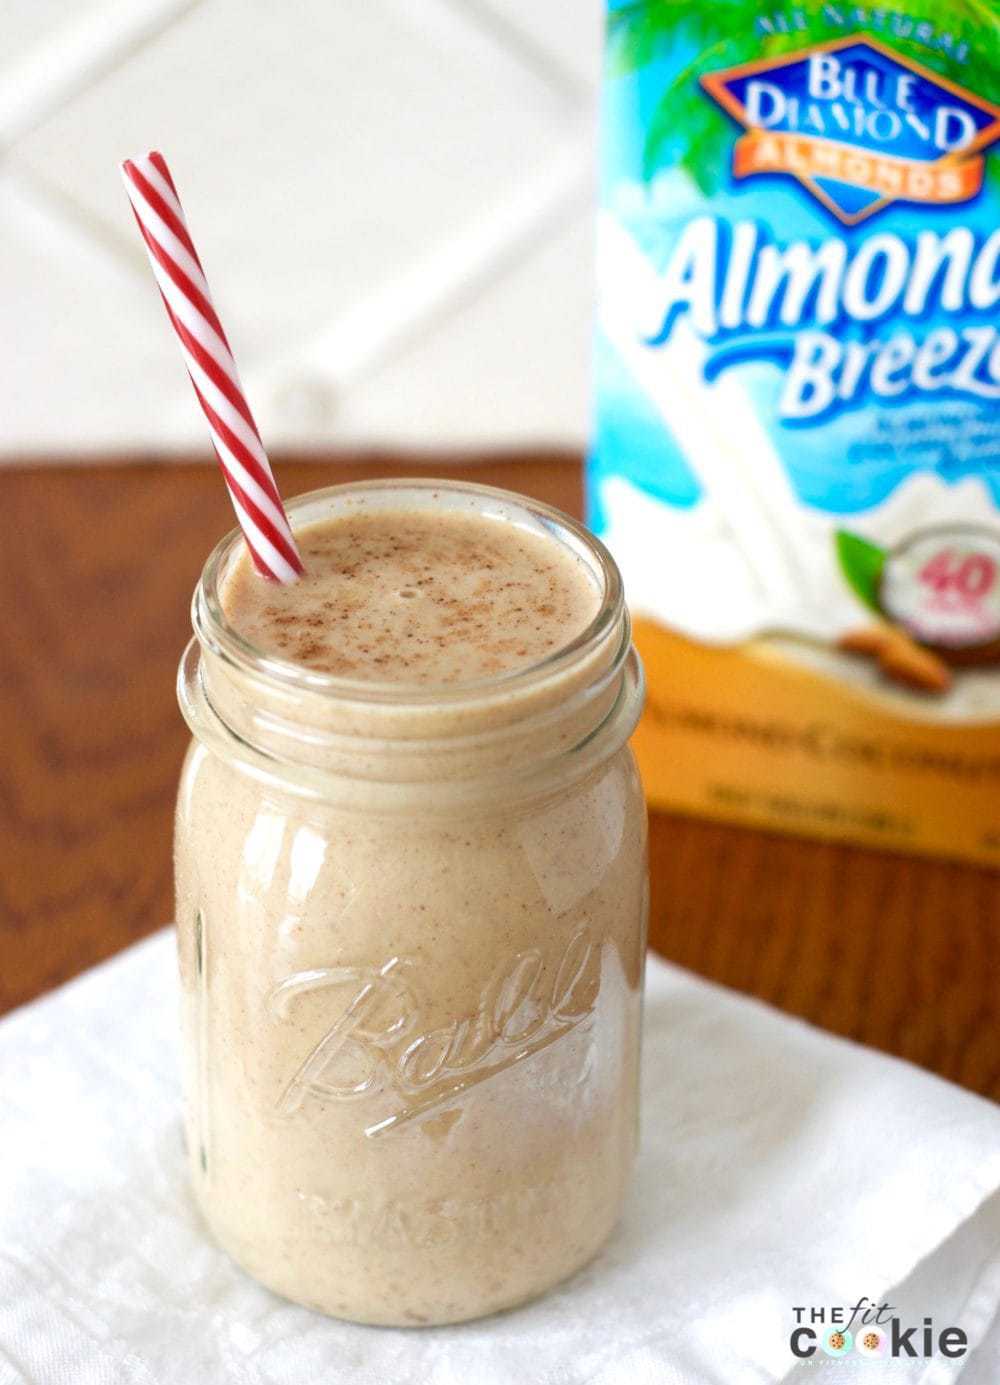 Creamy and delicious, you'll never know that this Eggnog Protein Shake is #healthy and #vegan! @thefitcookie #glutenfree #smoothie